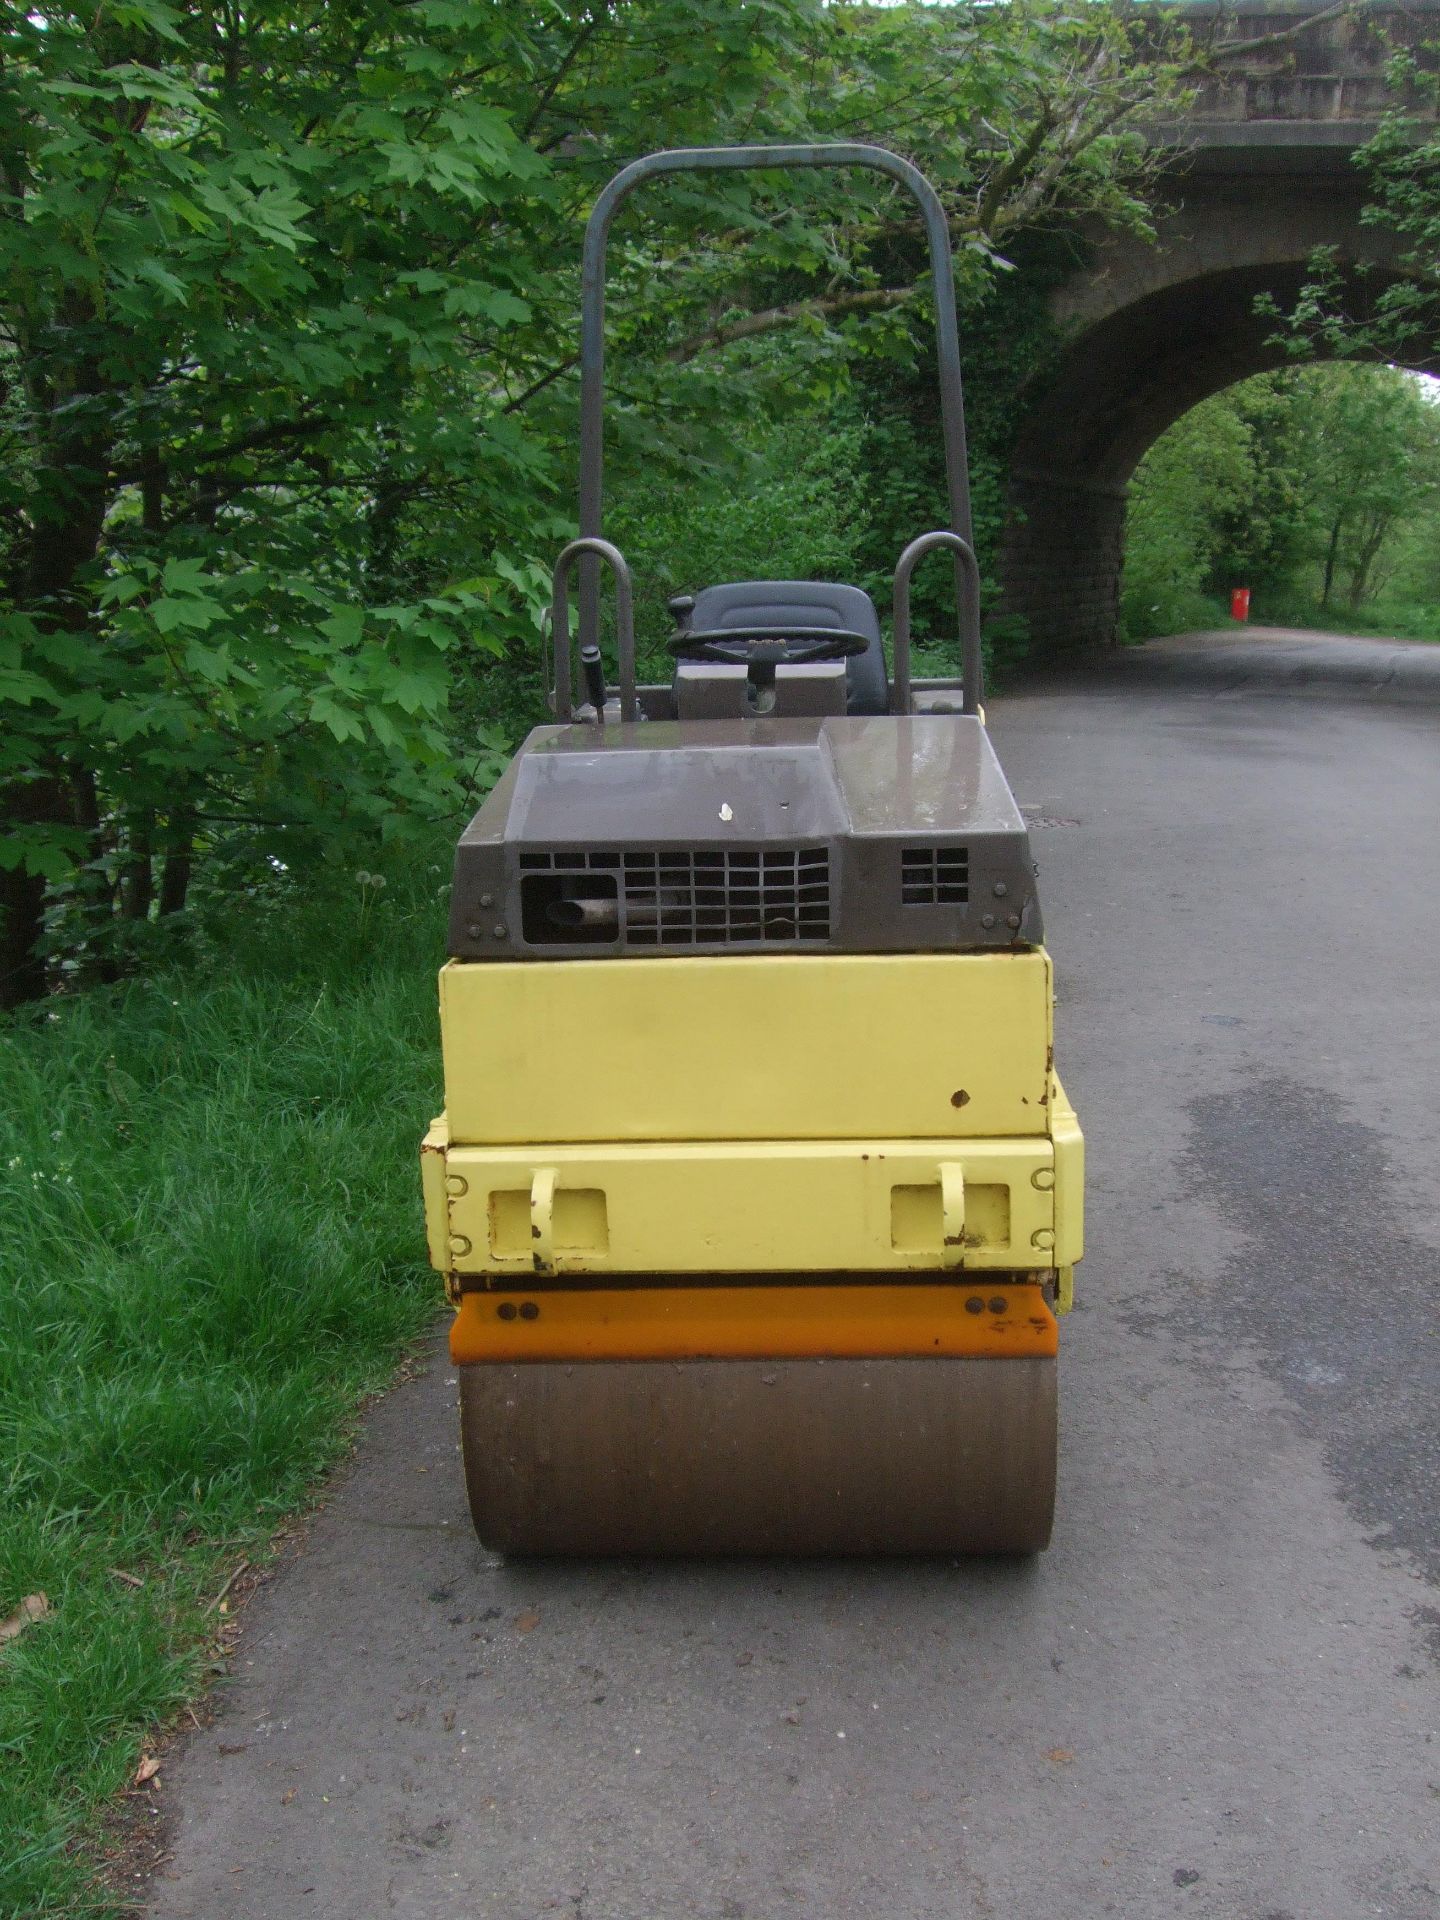 BOMAG BW80 ADH-2 ROLLER - 2628 RECORDED HOURS - NEW BATTTERY - Image 2 of 5